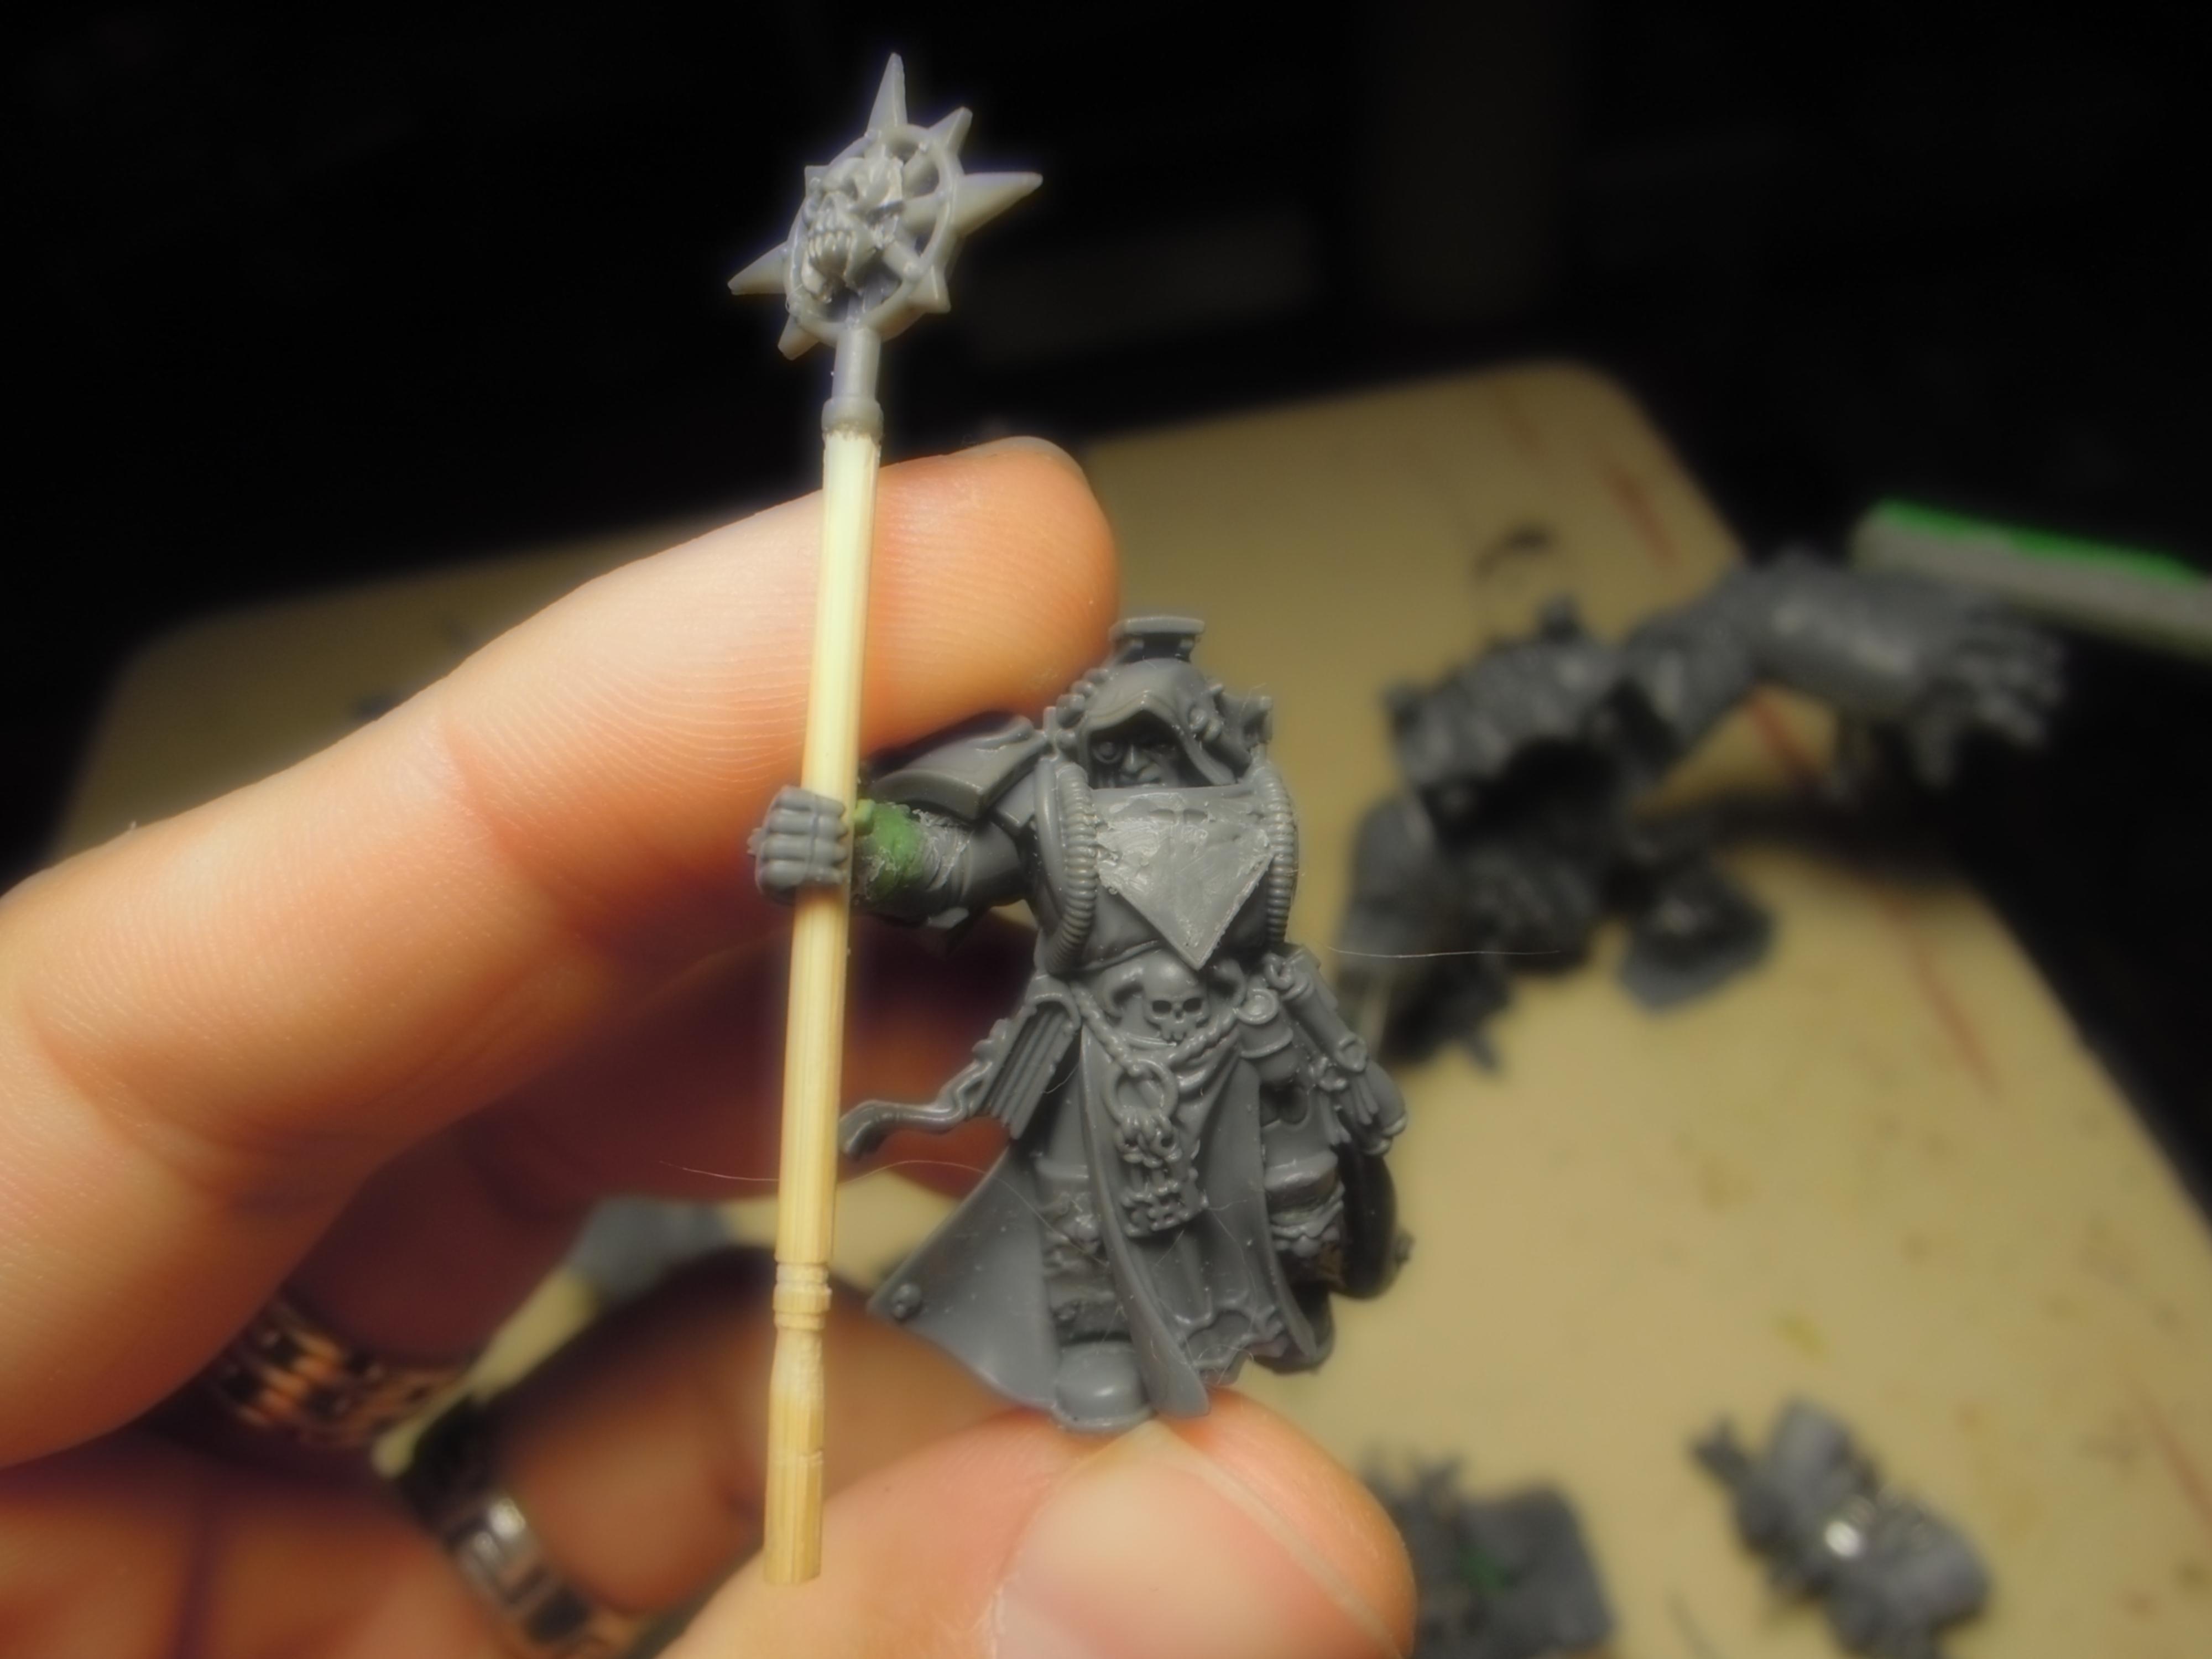 All Is Dust, Banner, Chaos, Chaos Space Marines, Conversion, Dark Vengeance, Heresy, Heretic Astartes, Infantry, Sorcerer, Thousand Sons, Traitor Legions, Tzeentch, Warhammer 40,000, Work In Progress